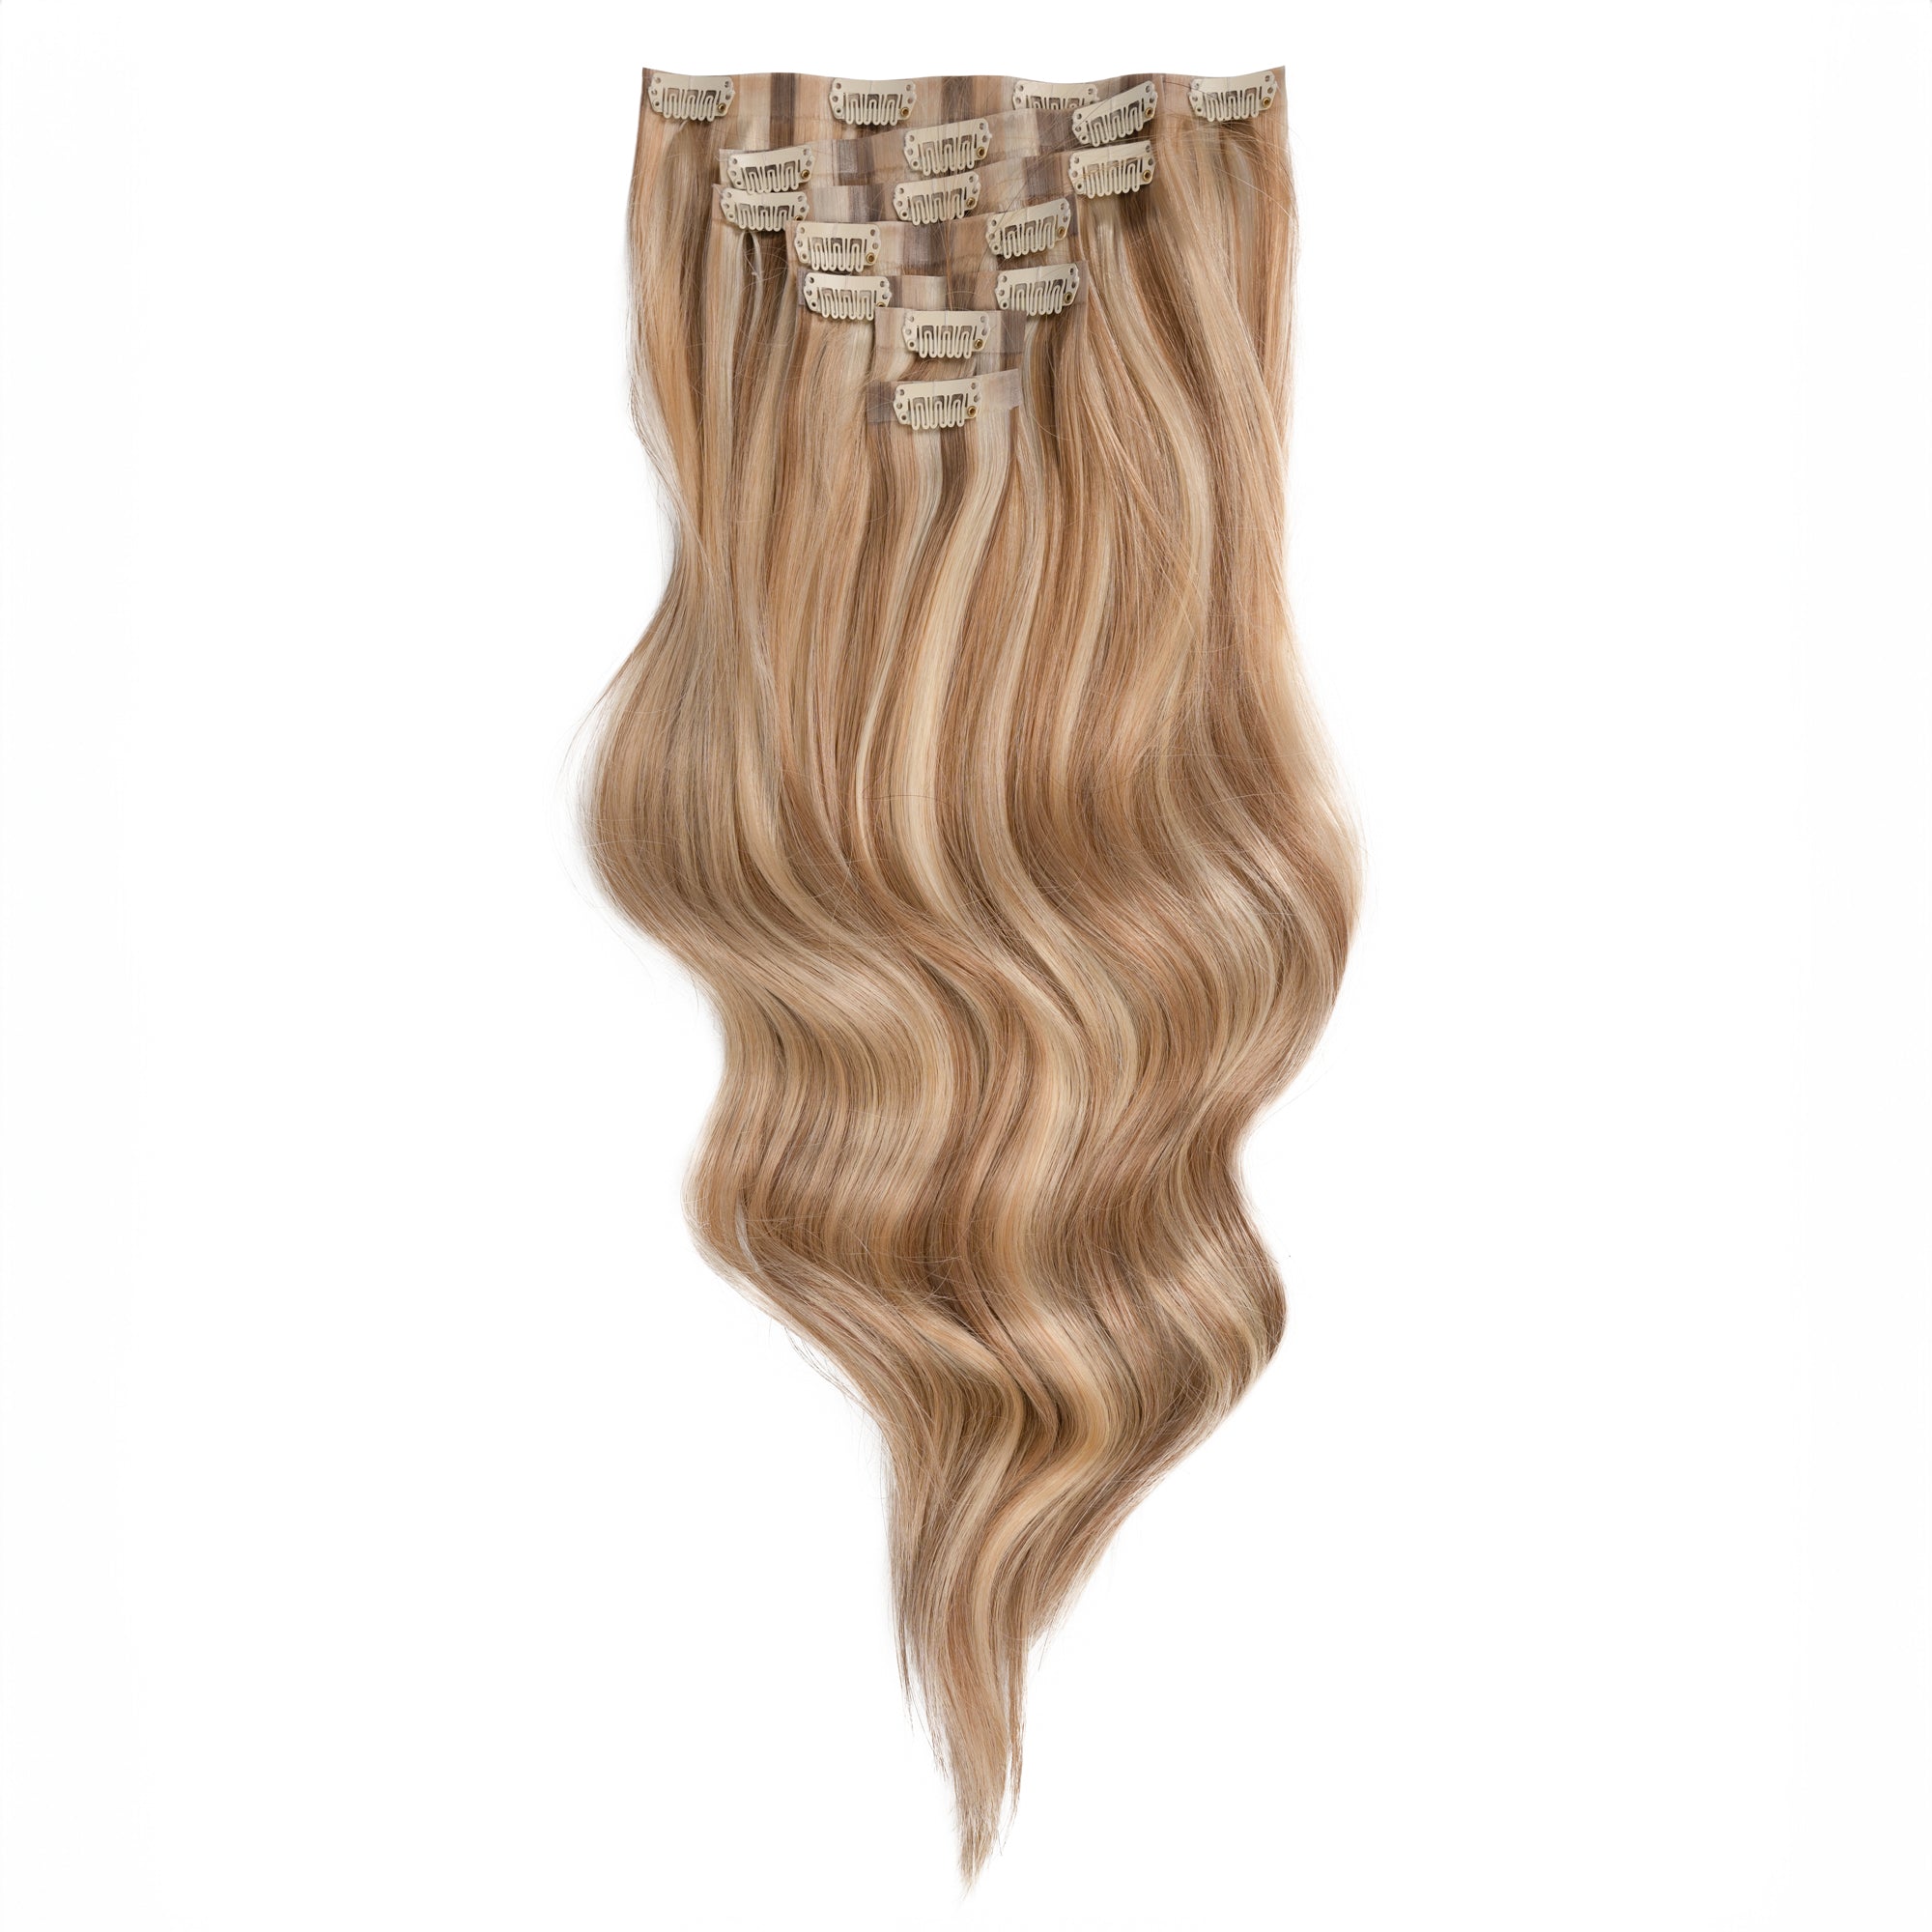 Duchess Elegant Clip-in Hair Extensions 20" Colour P10 24613 - Maneology Hair Extensions